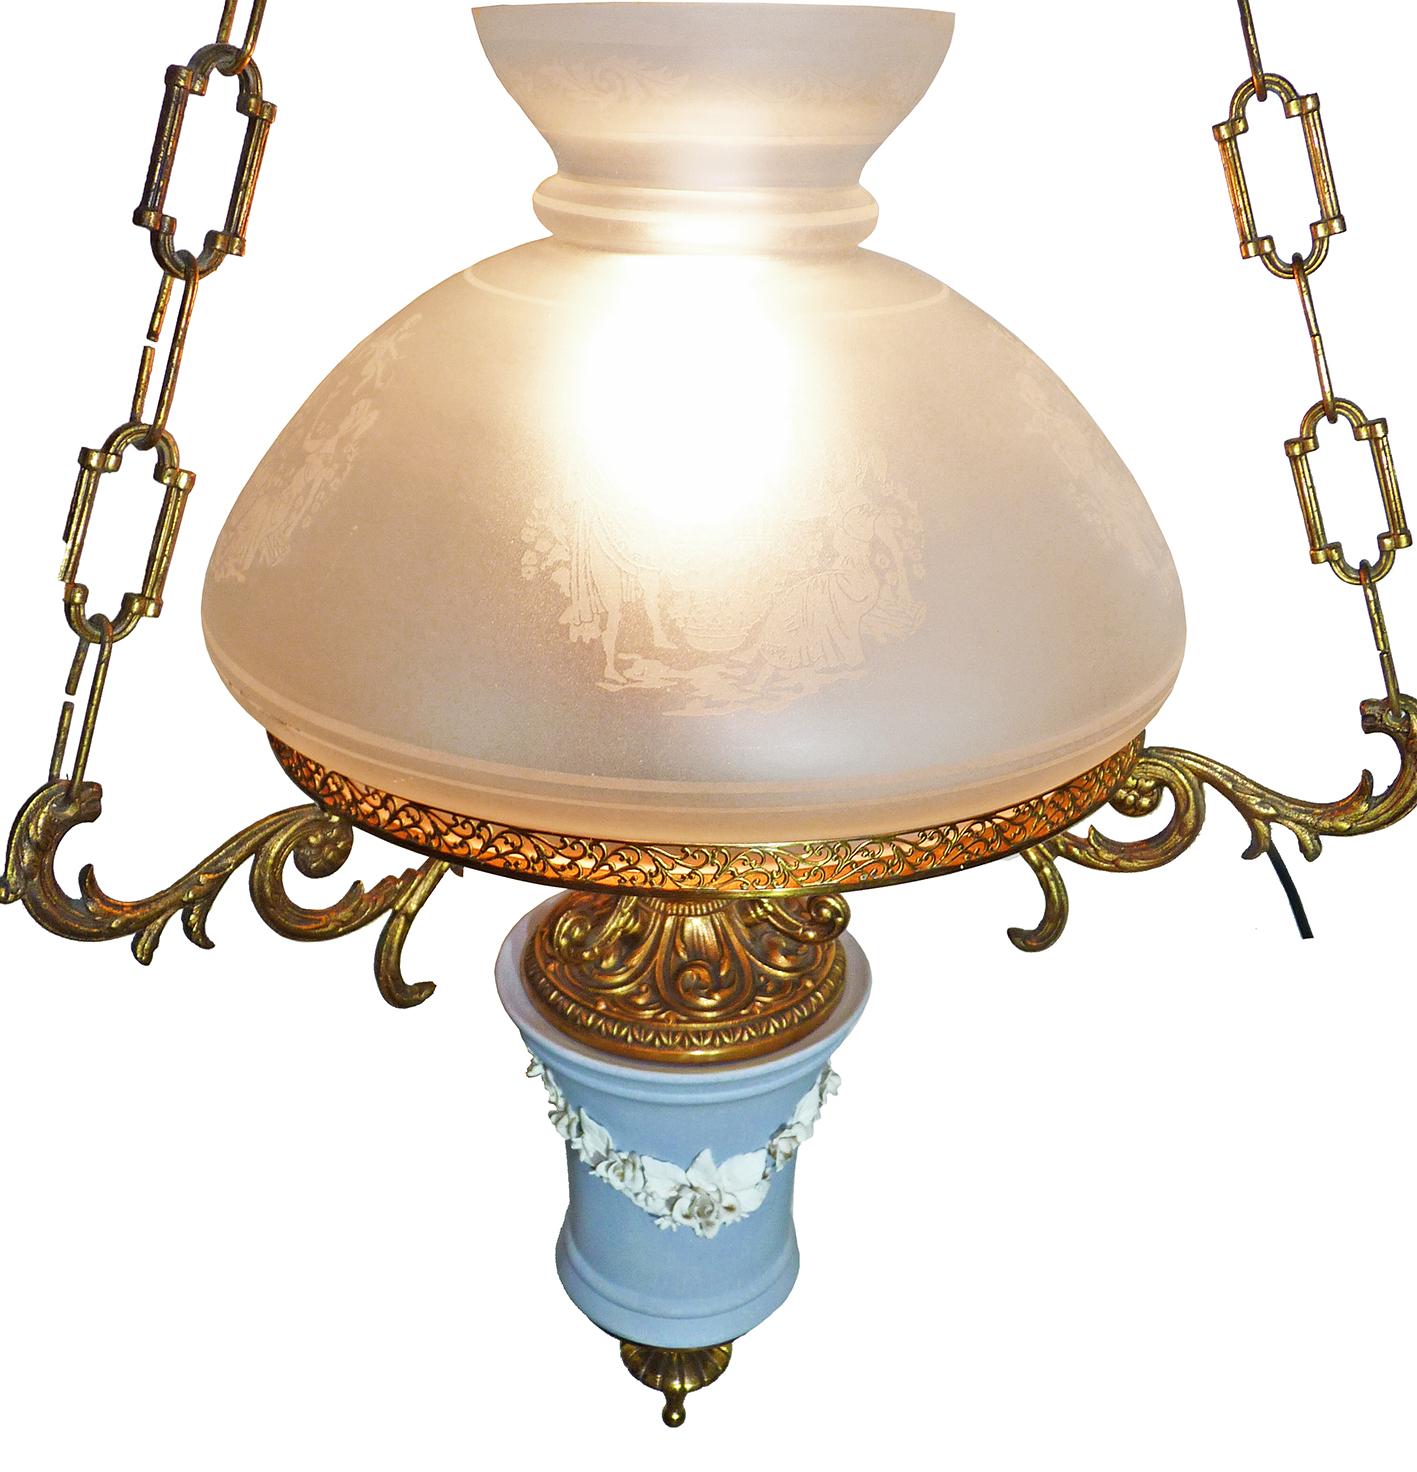 French English Wedgwood Porcelain Chandelier Gilt Bronze Victorian Library Hanging Lamp